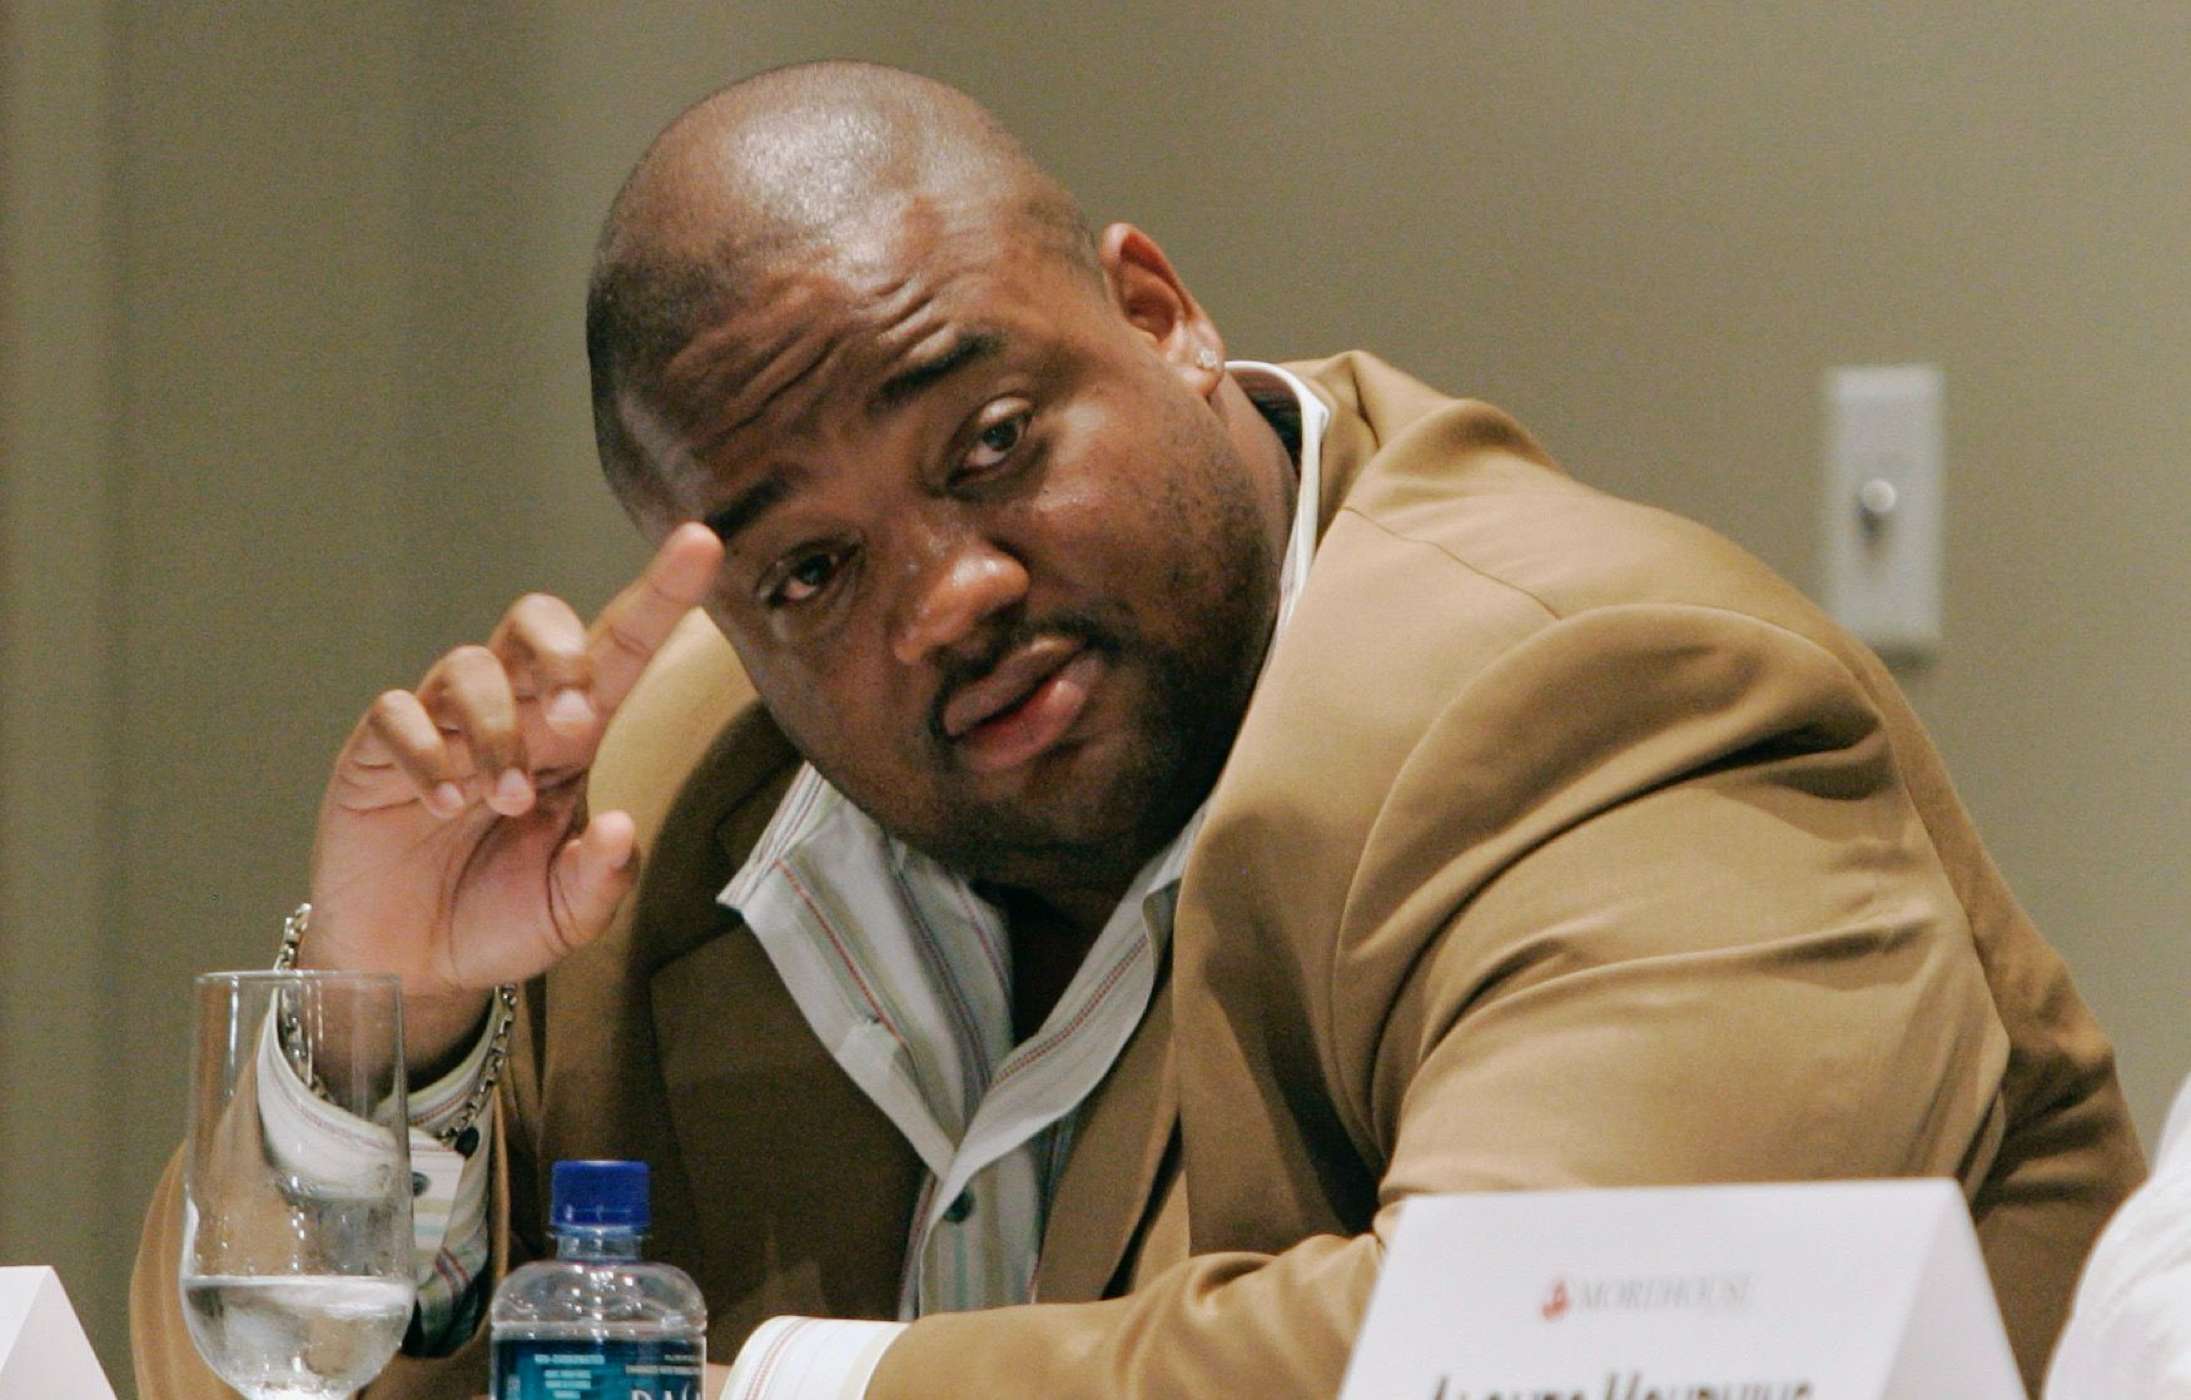 Special Guest: Jason Whitlock